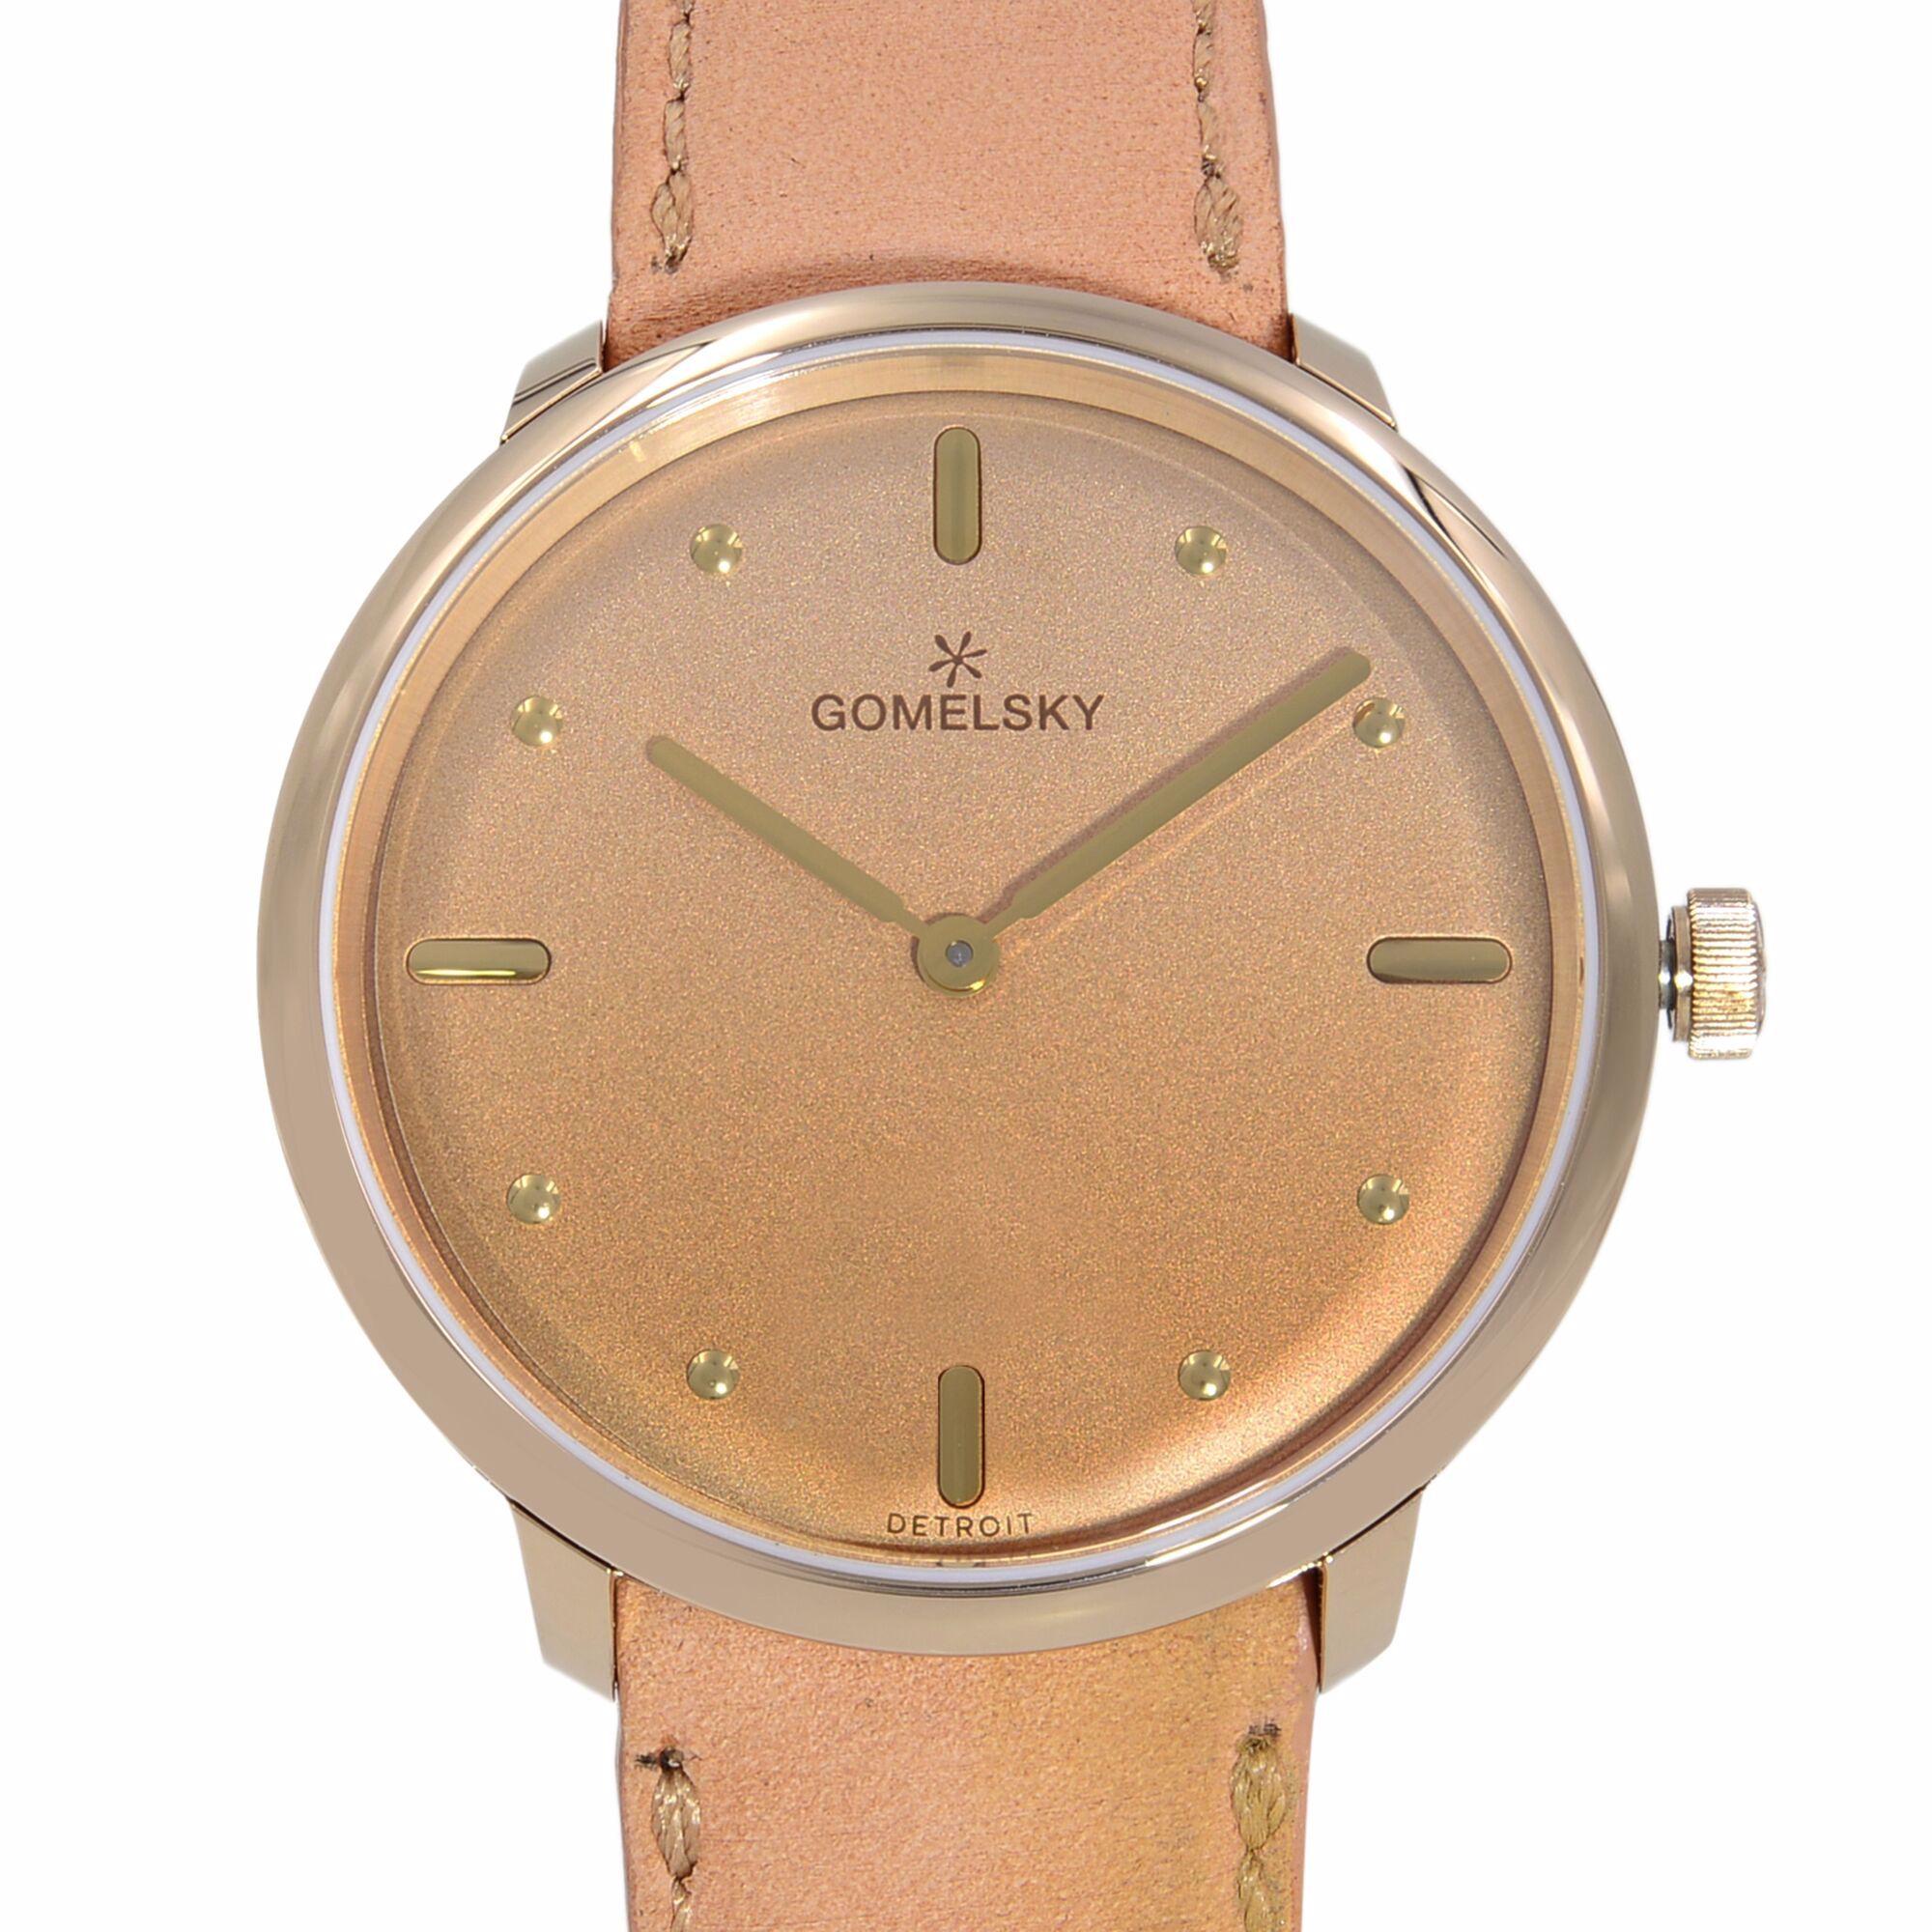 This brand new Gomelsky Audrey 6 G0120147278 is a beautiful Ladie's timepiece that is powered by quartz (battery) movement which is cased in a stainless steel case. It has a round shape face, no features dial and has hand sticks & dots style